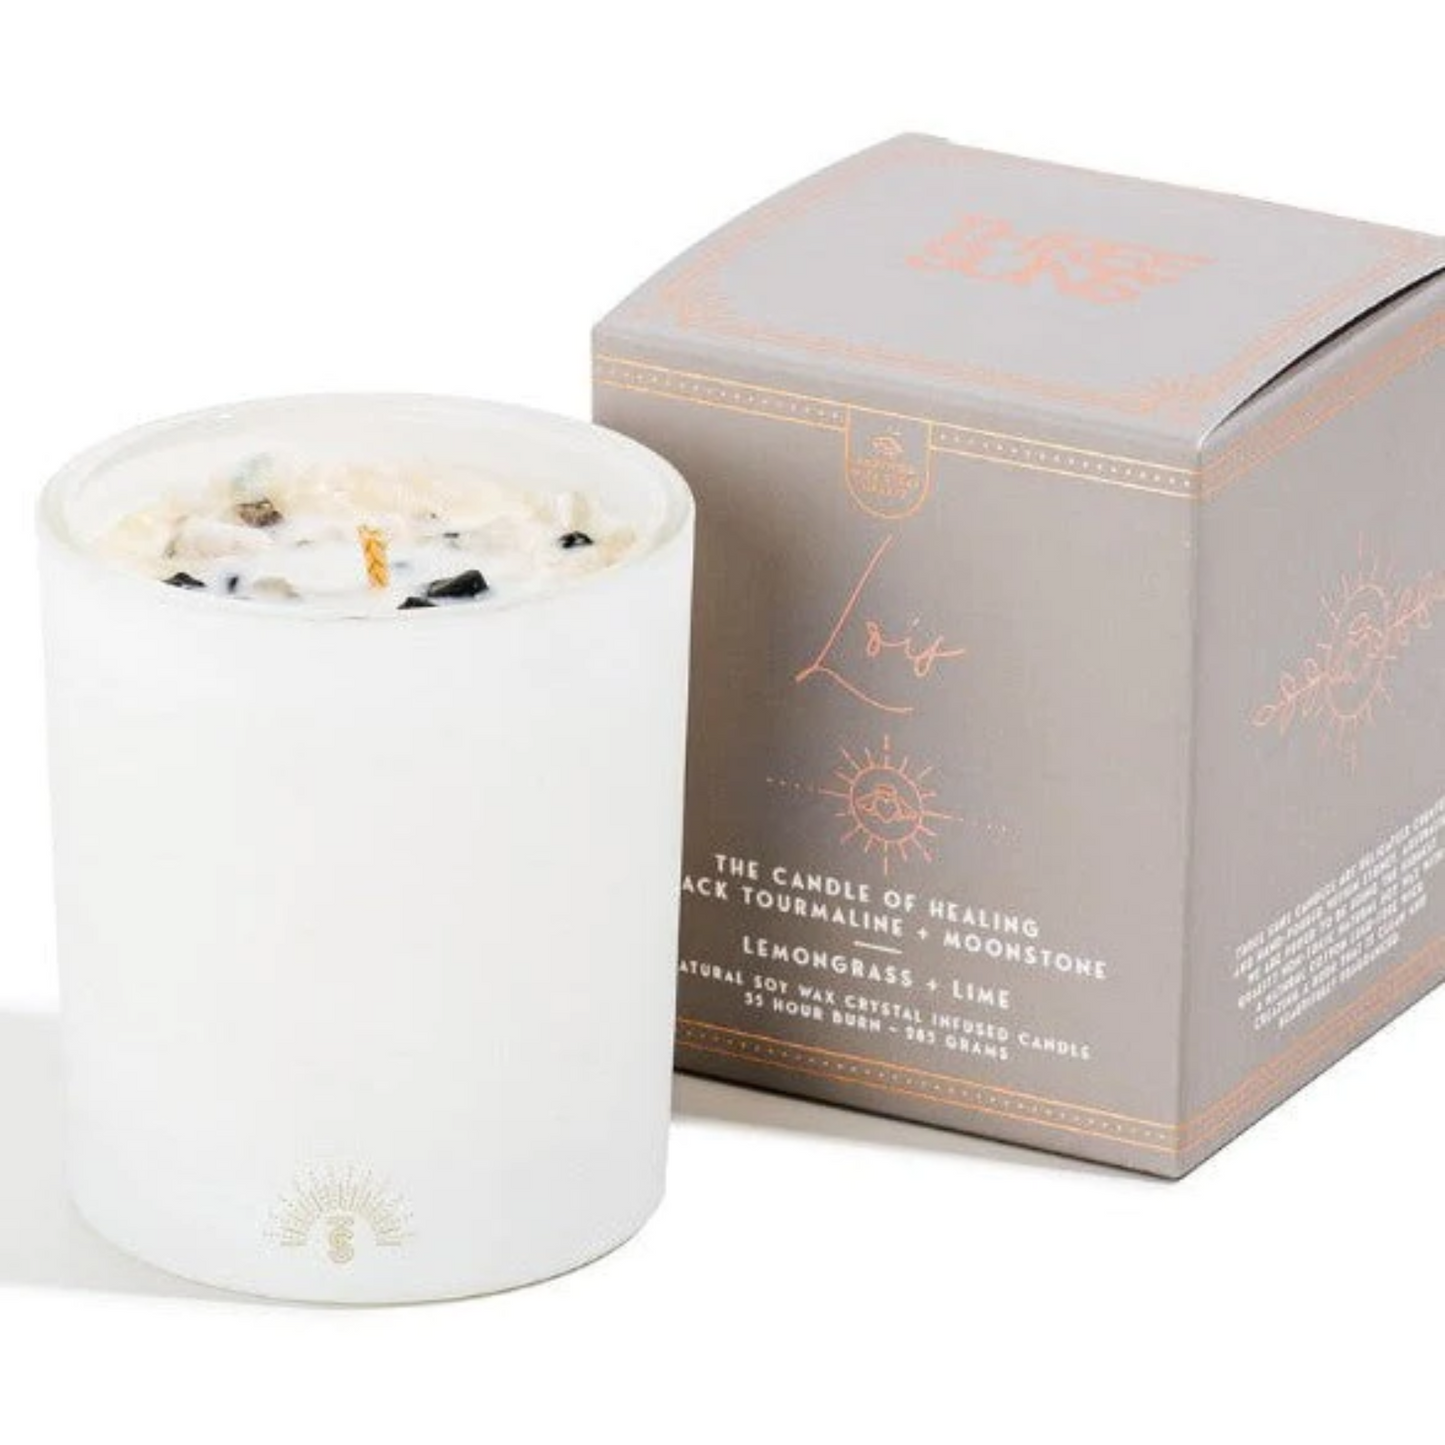 Lois | Crystal Infused Candle of Healing | Lemongrass & Lime